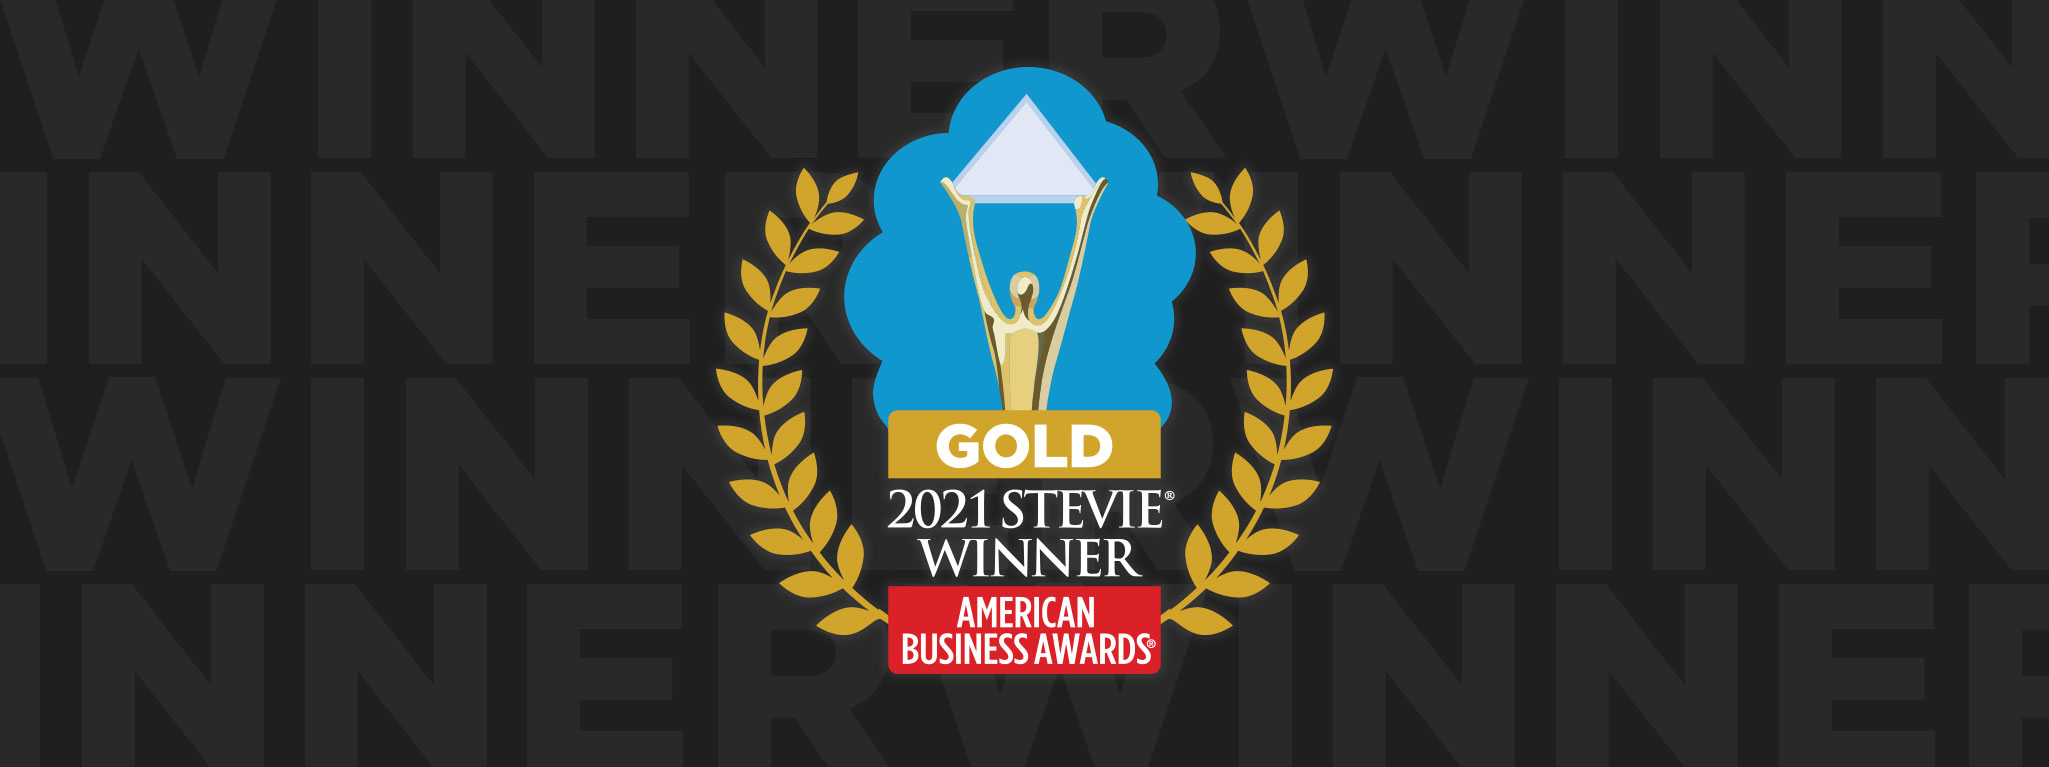 VideoAmp Awarded Gold Stevie as "Best New Product and Service of the Year, Video Platform for Media & Publishers"